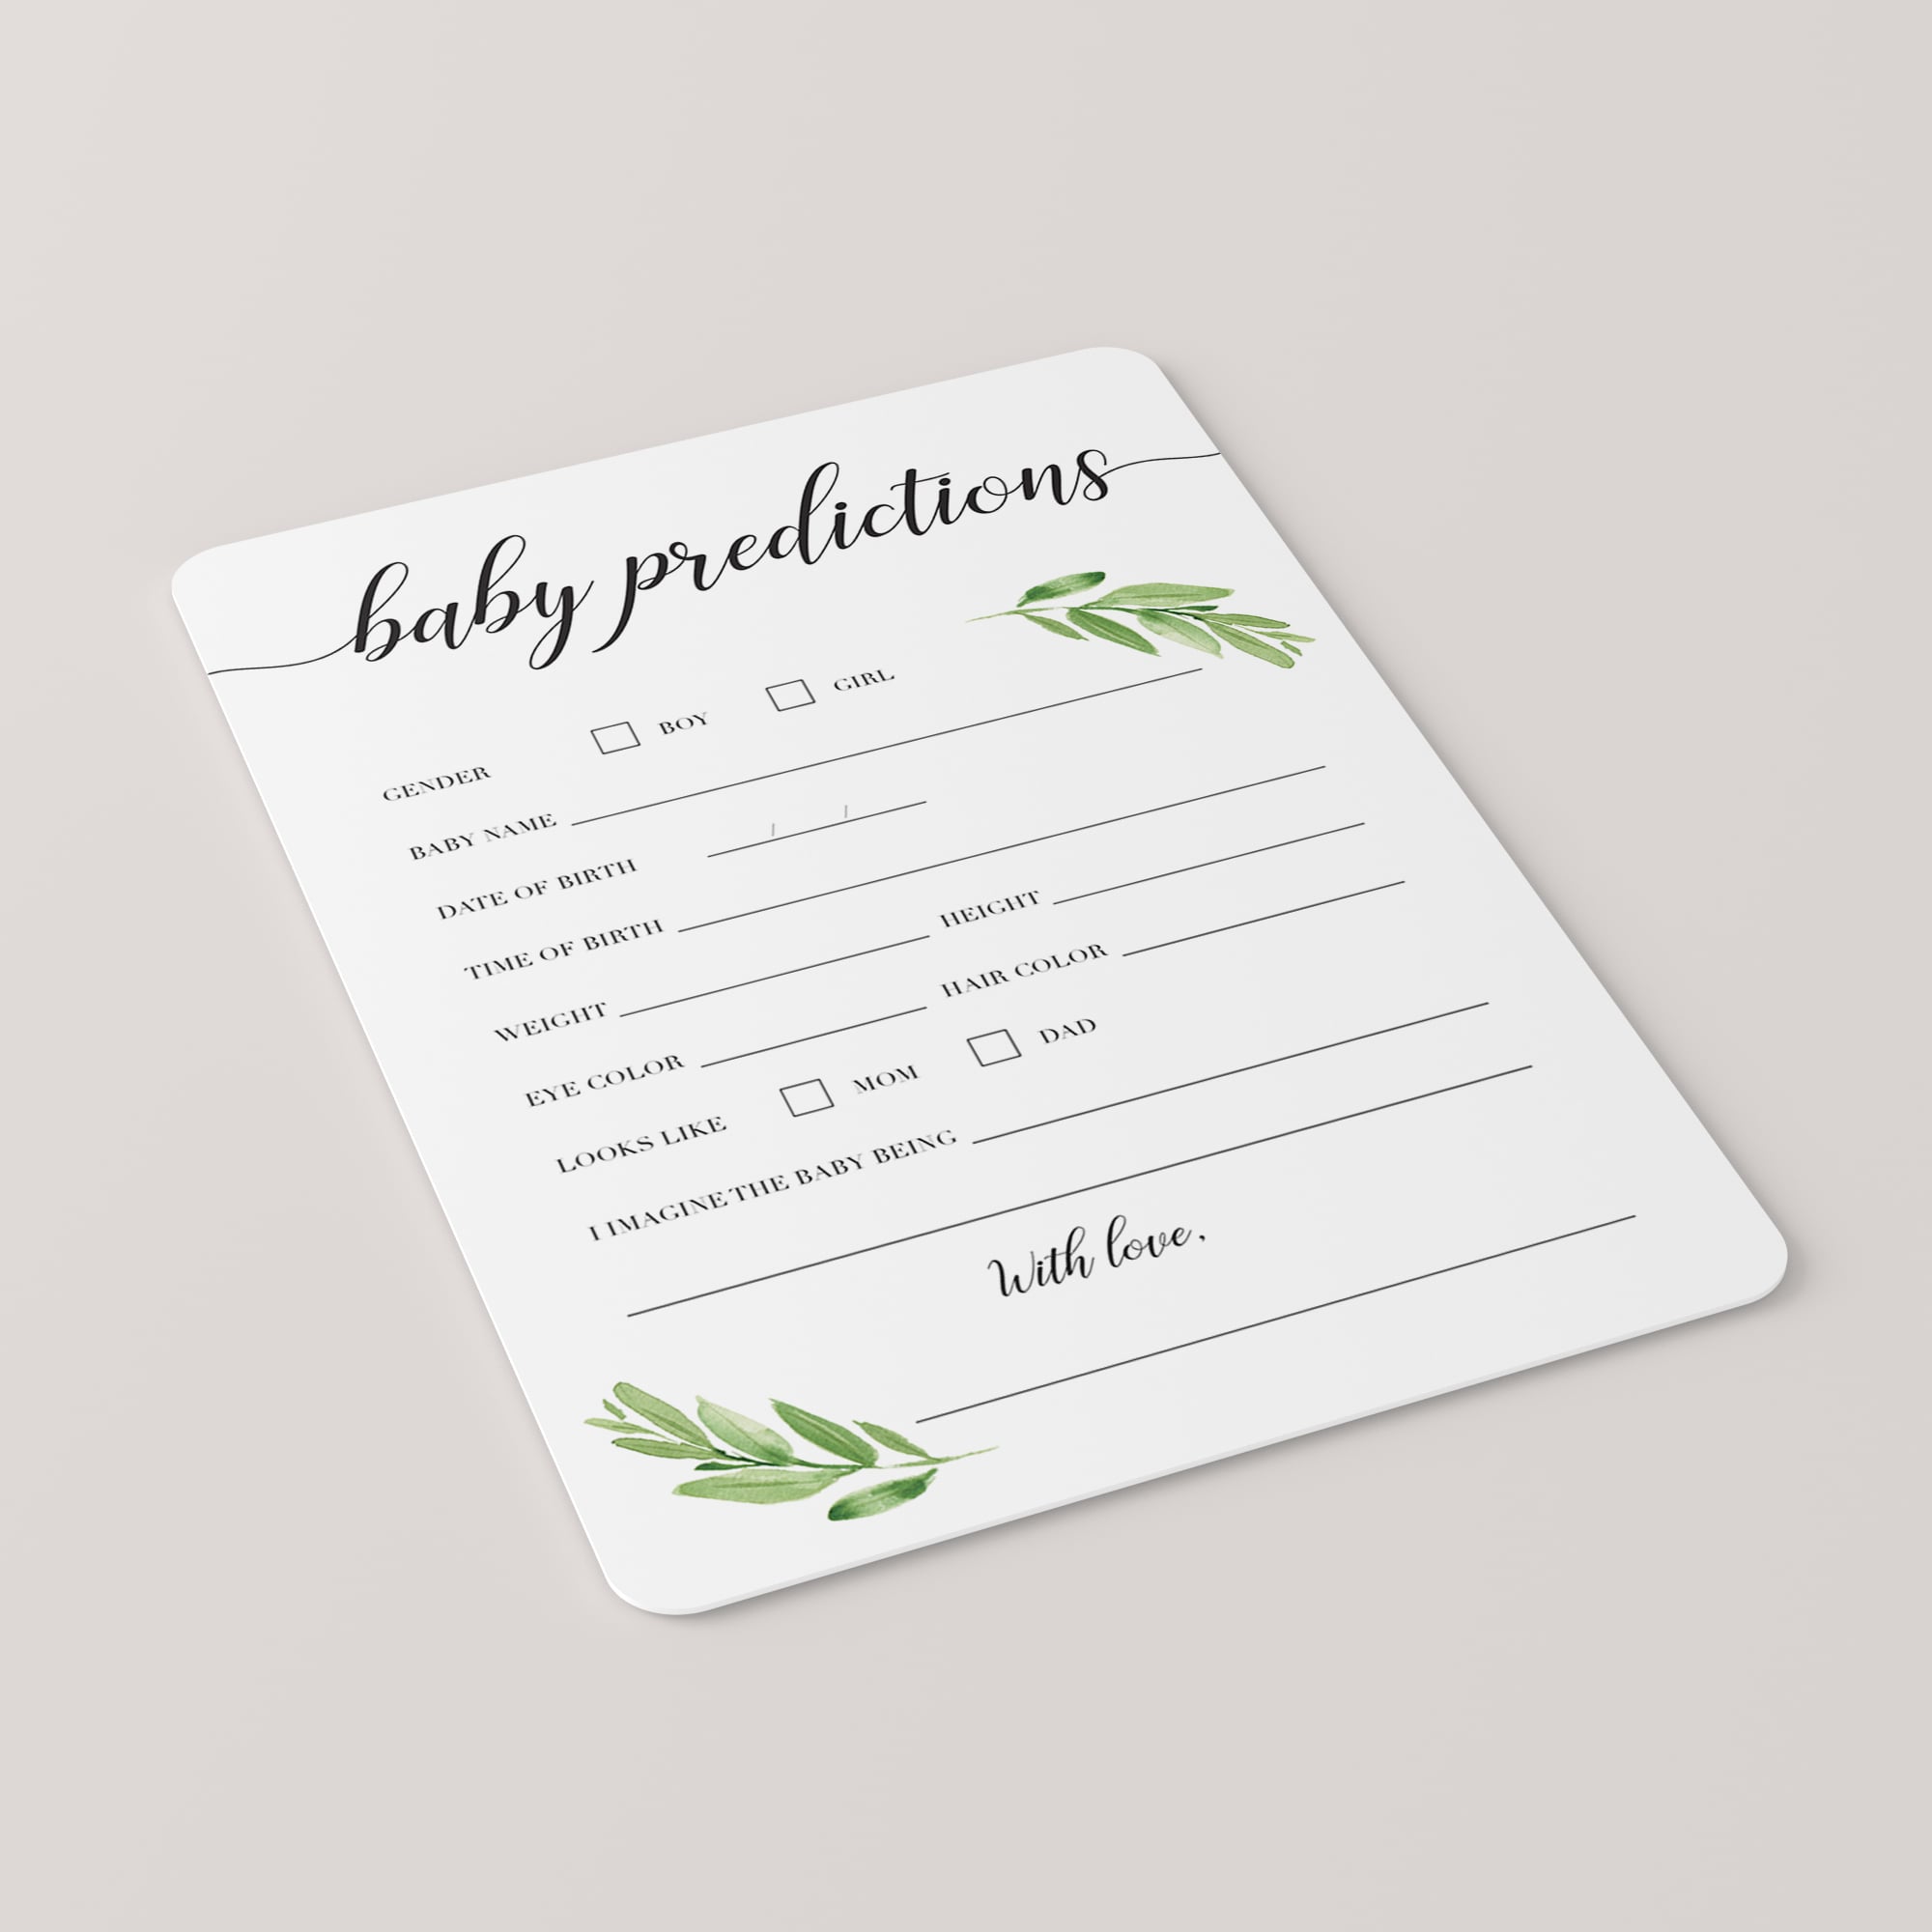 Baby Predictions cards printable greenery theme by LittleSizzle